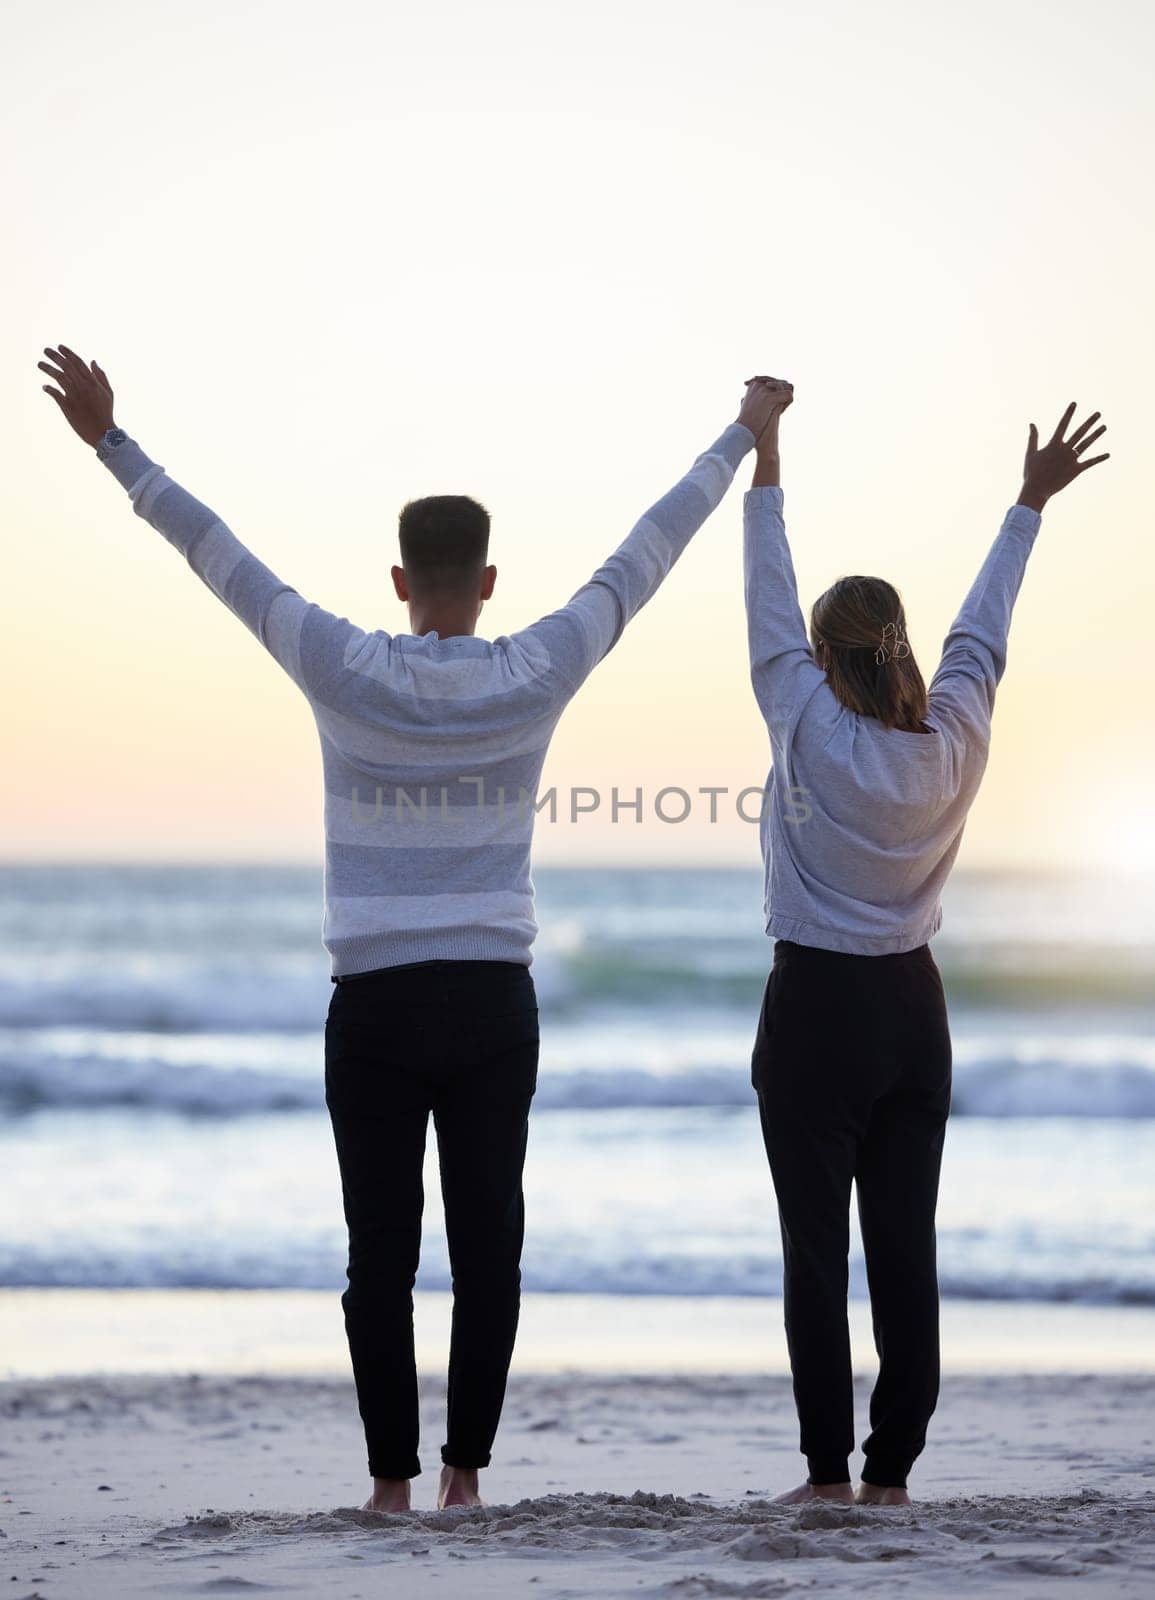 Couple, beach and hands up outdoor while happy at sunset for love, freedom and peace with calm ocean. Young man and woman together on vacation holiday at sea to relax, travel and connect in nature.